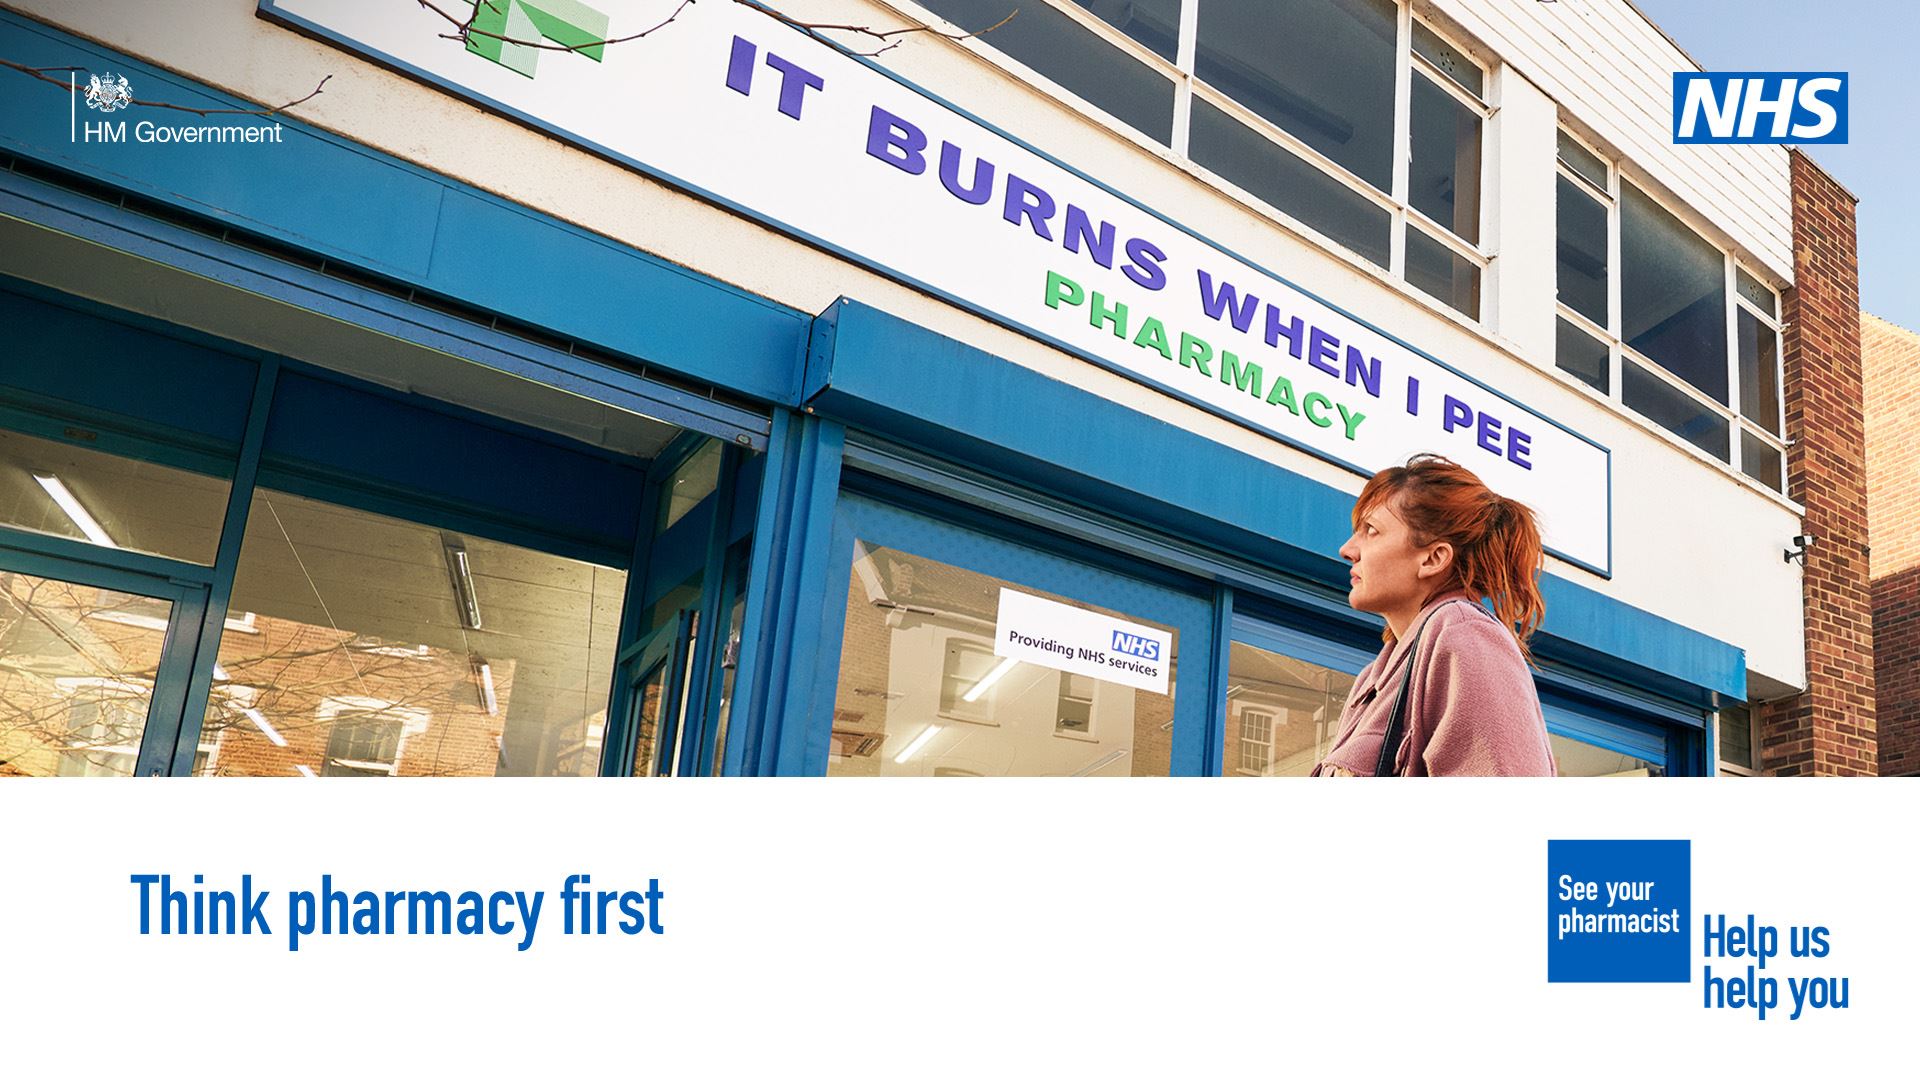 A person is standing outside a pharmacy looking uncomfortable. The sign above the pharmacy reads 'It burns when I pee pharmacy'   A lower third box features in the bottom on the image. Text in the box reads: 'Think pharmacy first'